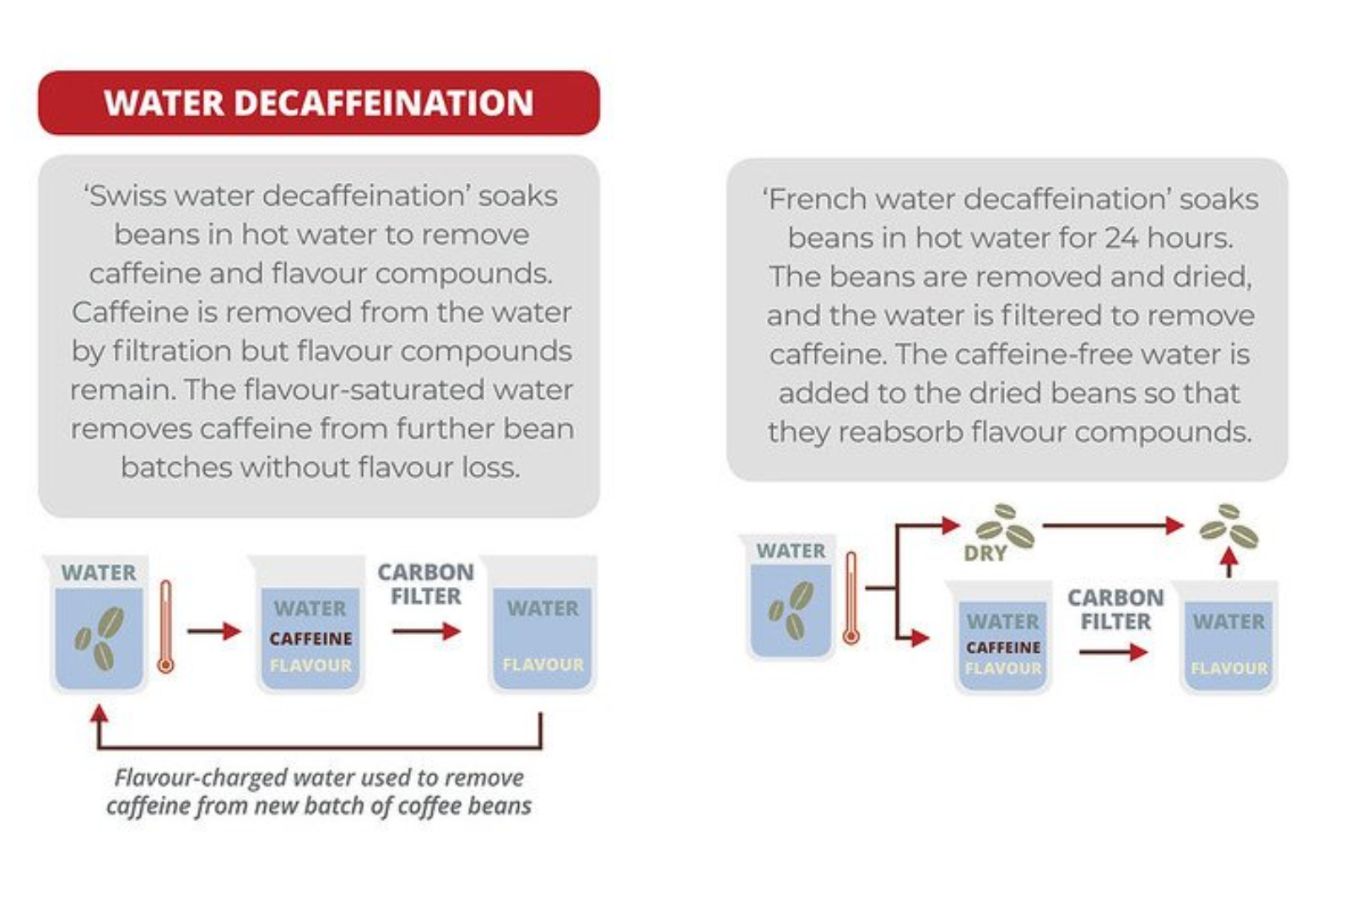 Decaffeination Processes In Decaf Coffee